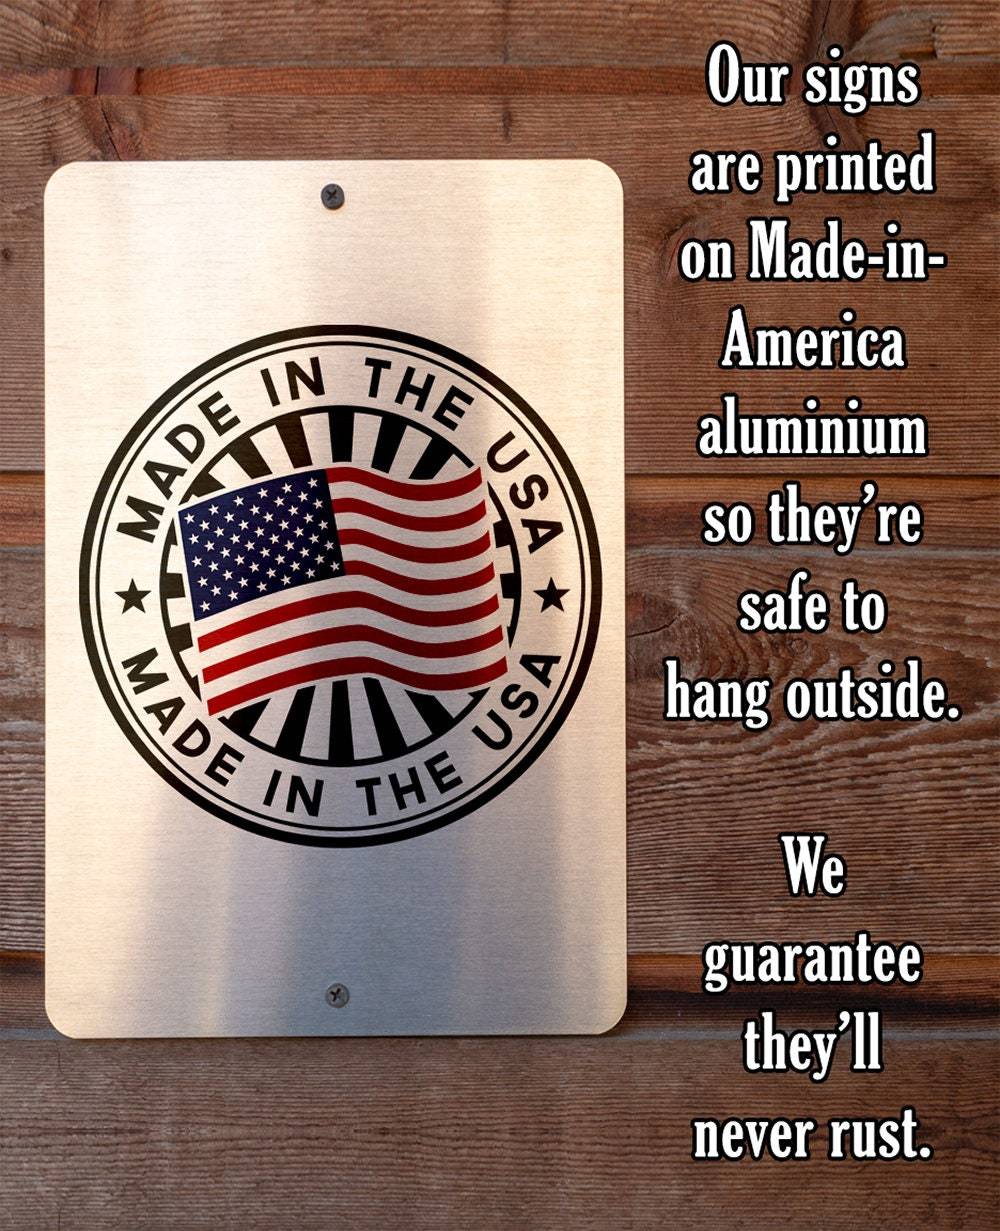 Personalized - American Made From The Finest Italian Parts - Metal Sign | Lone Star Art.